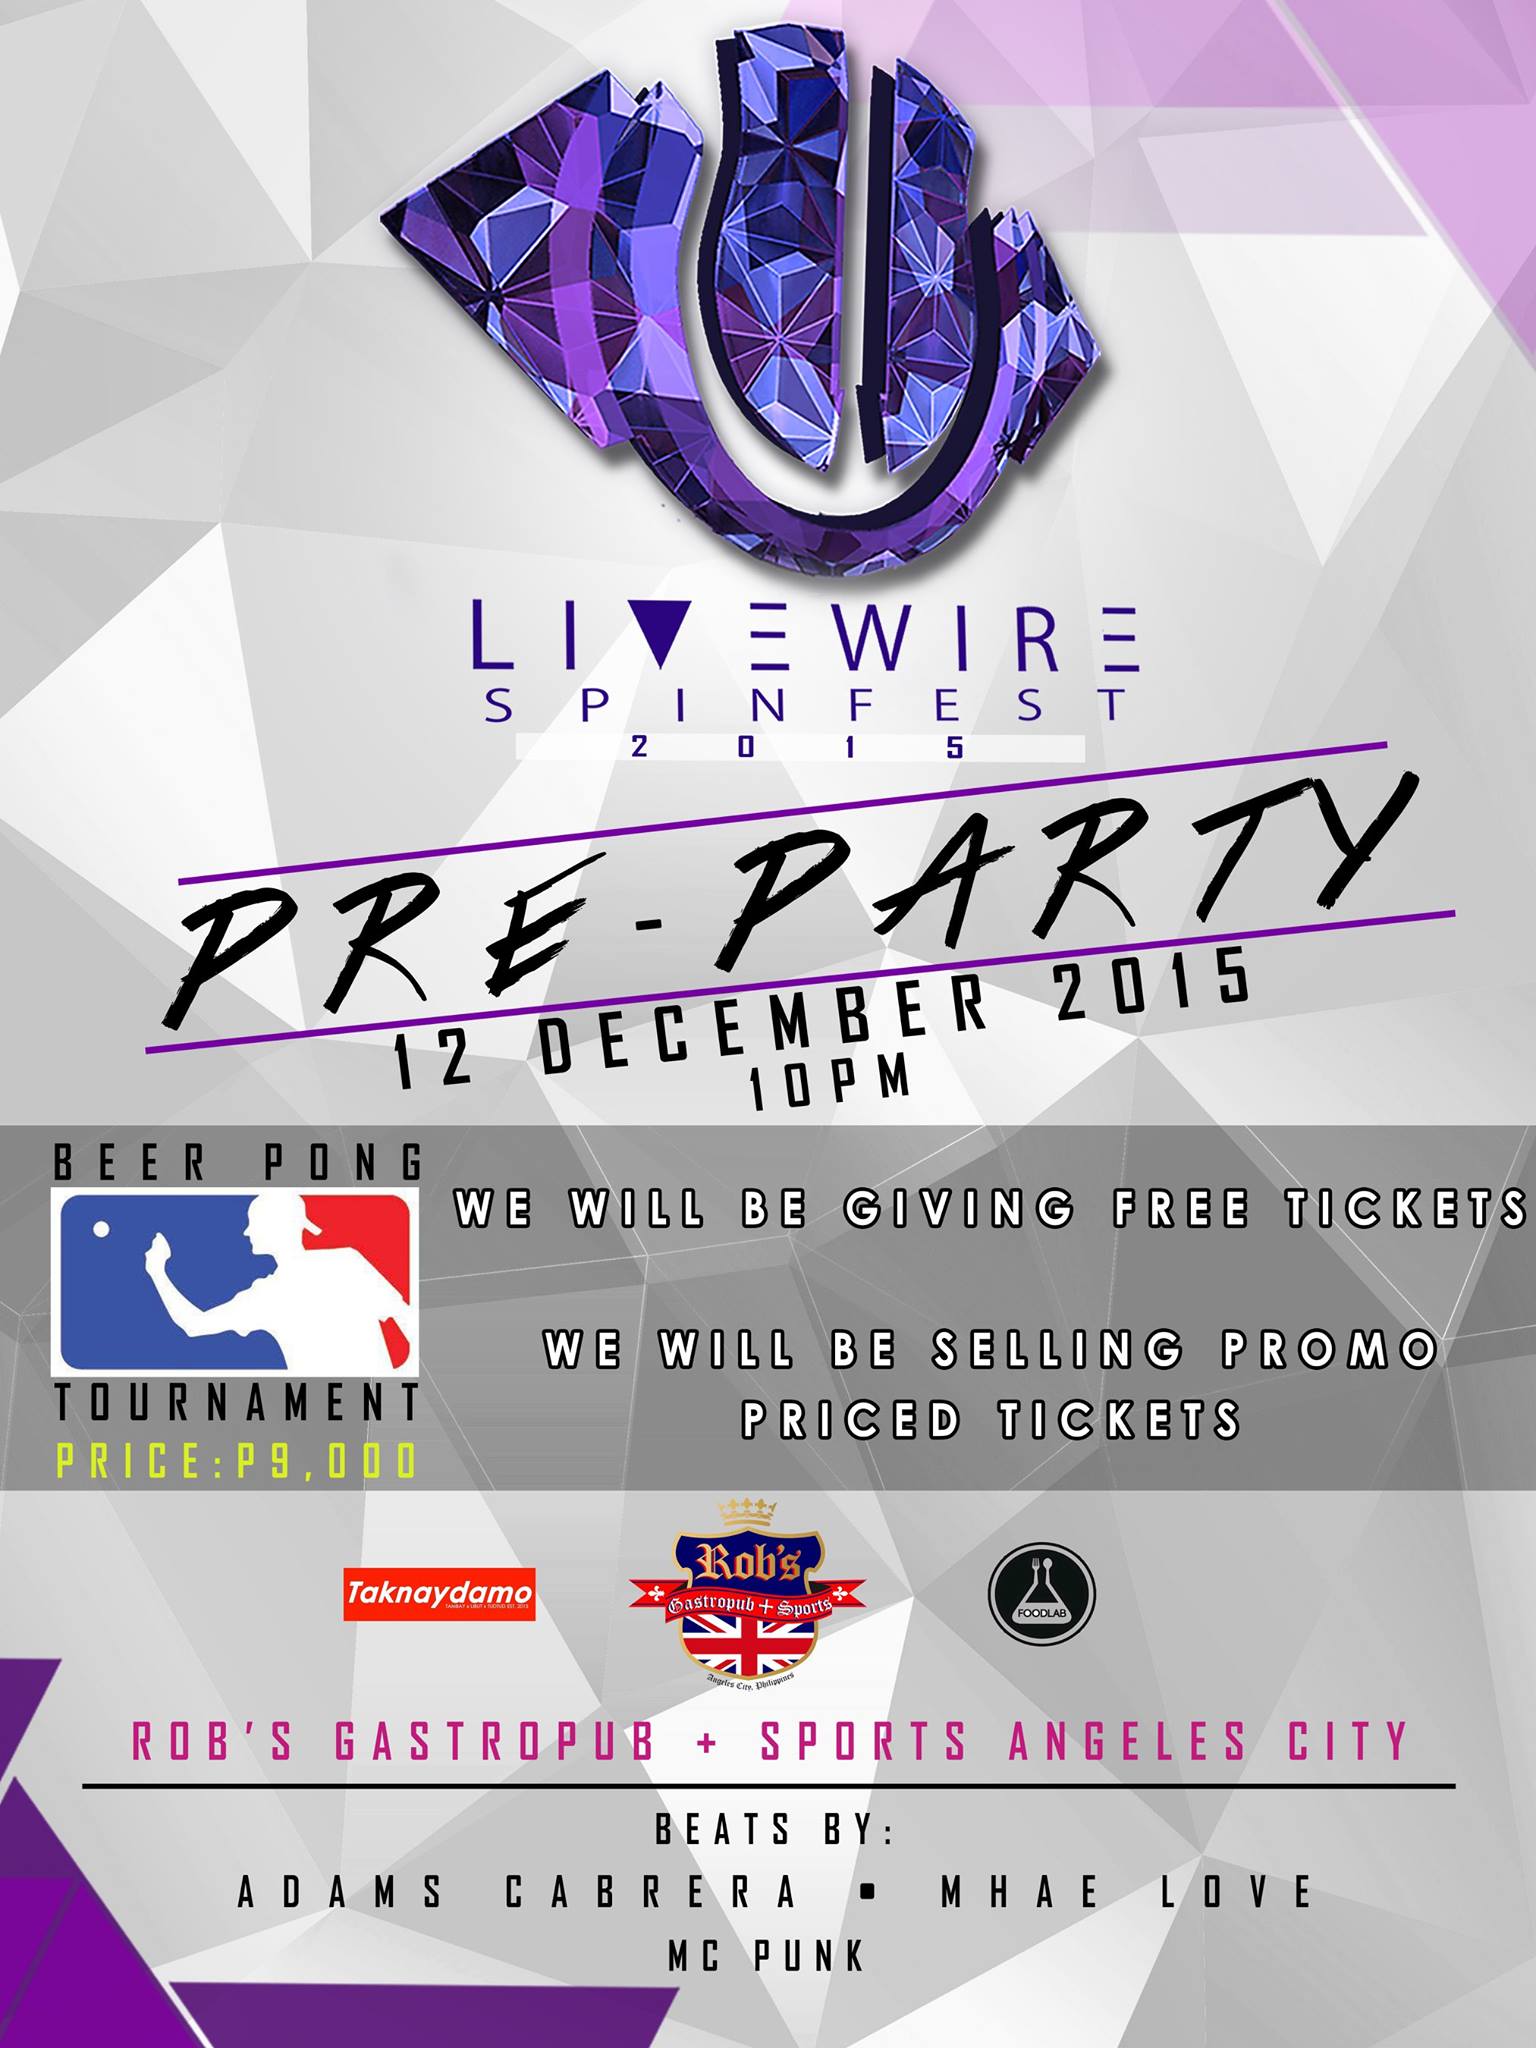 Livewire Pre party December 12 2015 At Rob's Gastropub + Sports Catch Beerpong tournament Prize: Beerpong tournament trophy Php 9,000 (Cash) One bottle of liquor Two VIP tickets for Livewire Spinfest on december 18 2015 We will also giving away free ticket We will also sell promo priced tickets. Beats by: Adams Cabrera Mhae Love Hype by: Mc Punk ‪#‎LivewirePH2015‬ ‪#‎CuervoLivewire‬ ‪#‎LiveFeelRave‬ ‪#‎BeAlive‬